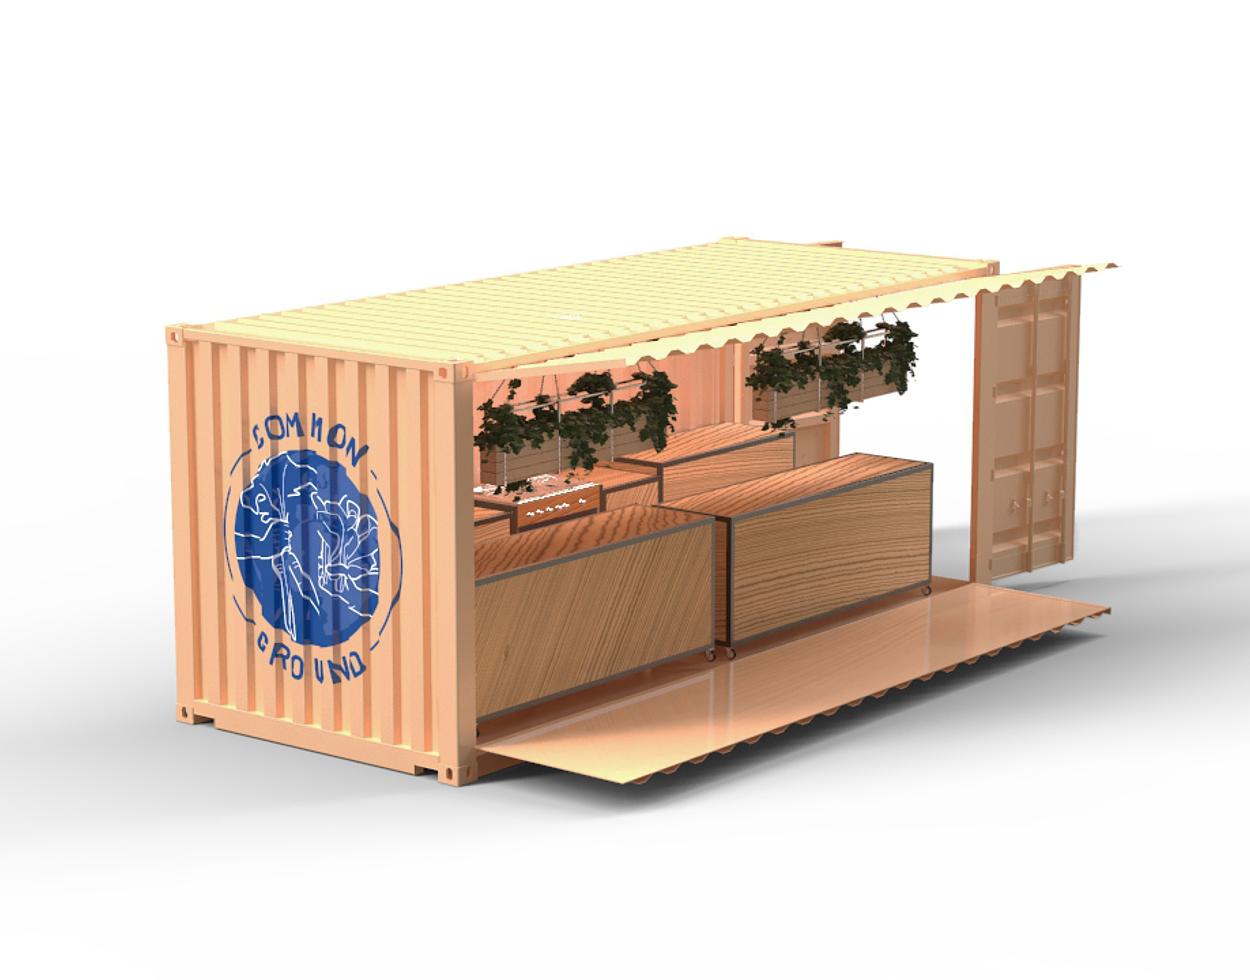 When the container is opened and placed, you can find boxes with casterwheels under them. The wheels enable the movement of the boxes. The boxes can then be rolled on the surface of the folding door. The top of the box then serves as kitchen table.